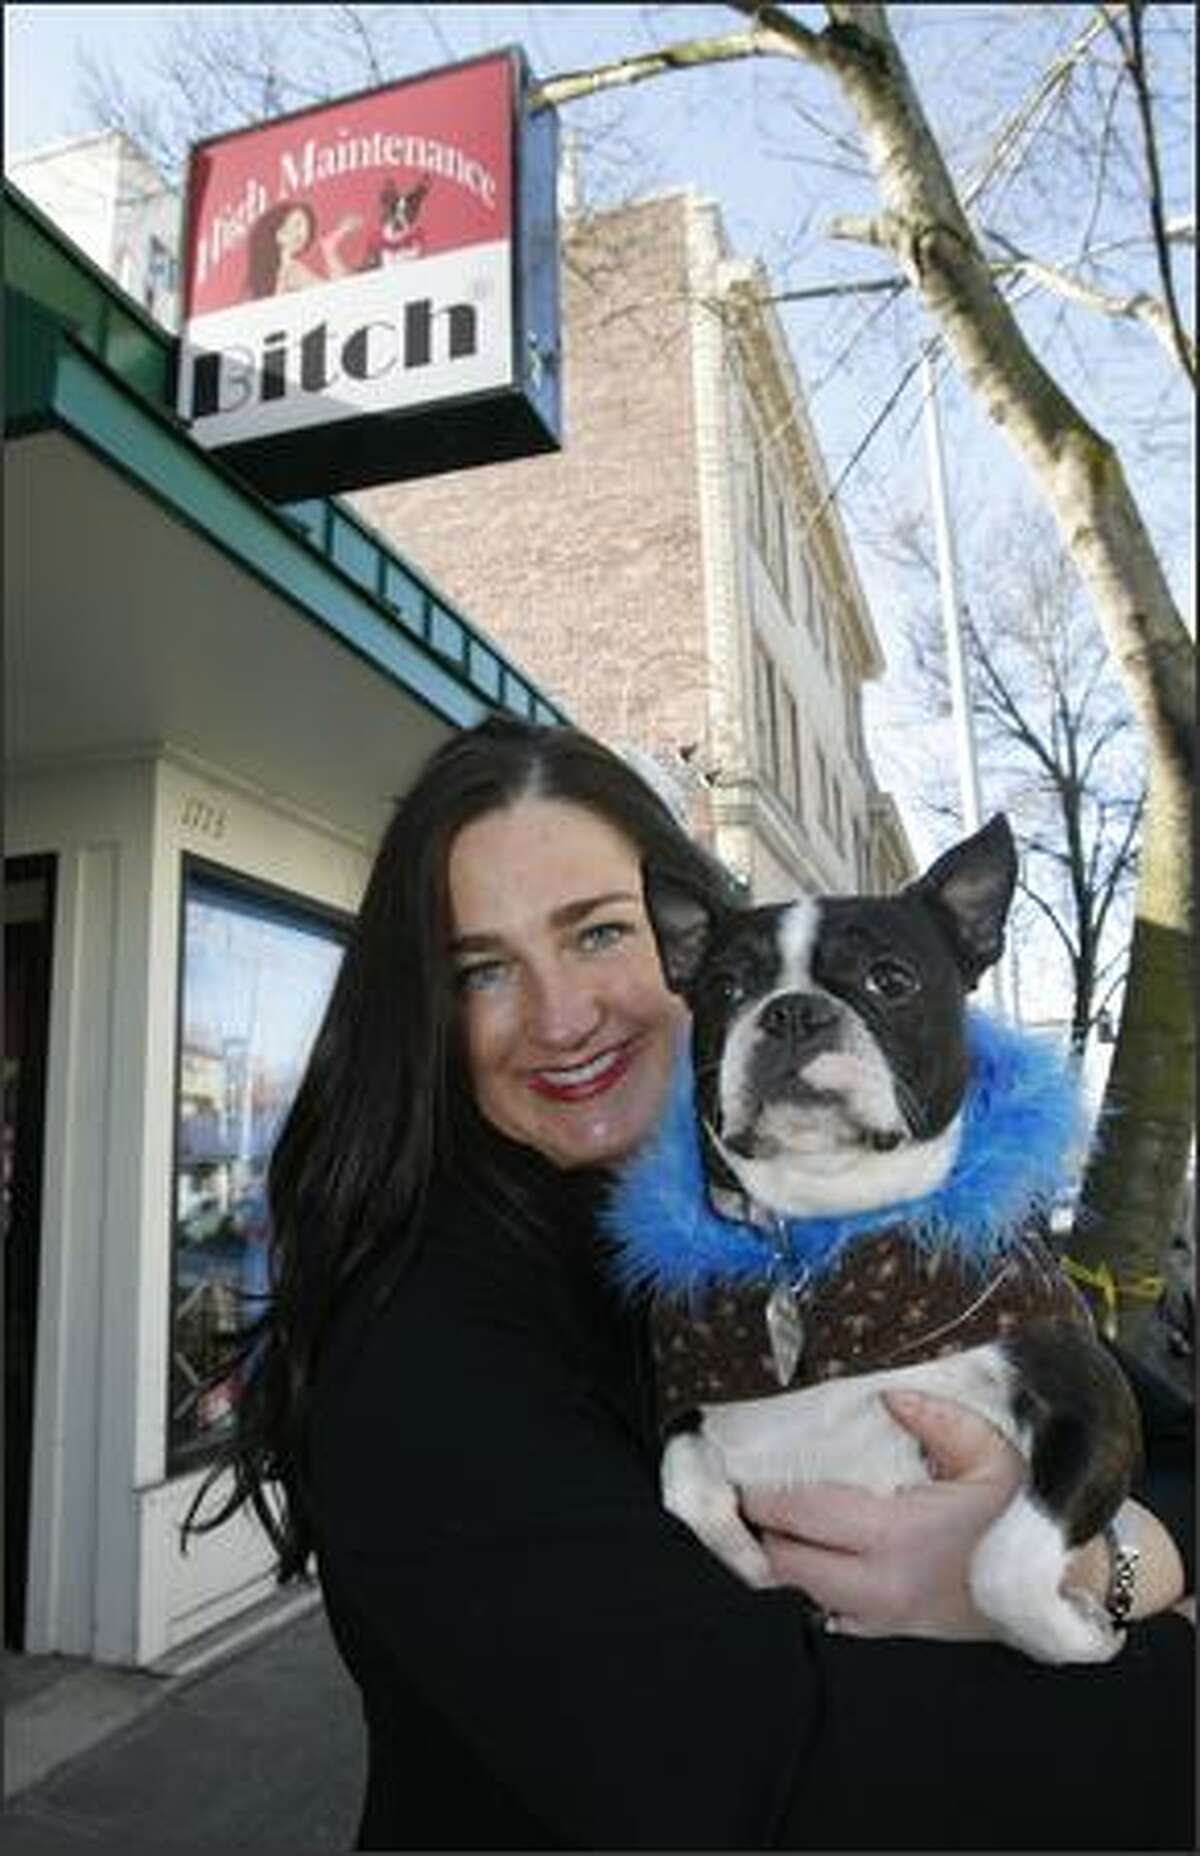 It all began five years ago, when Boston terrier Lola inspired Lori Pacchiano and her brother to make pet feather boas in their grandmother's North Seattle garage.